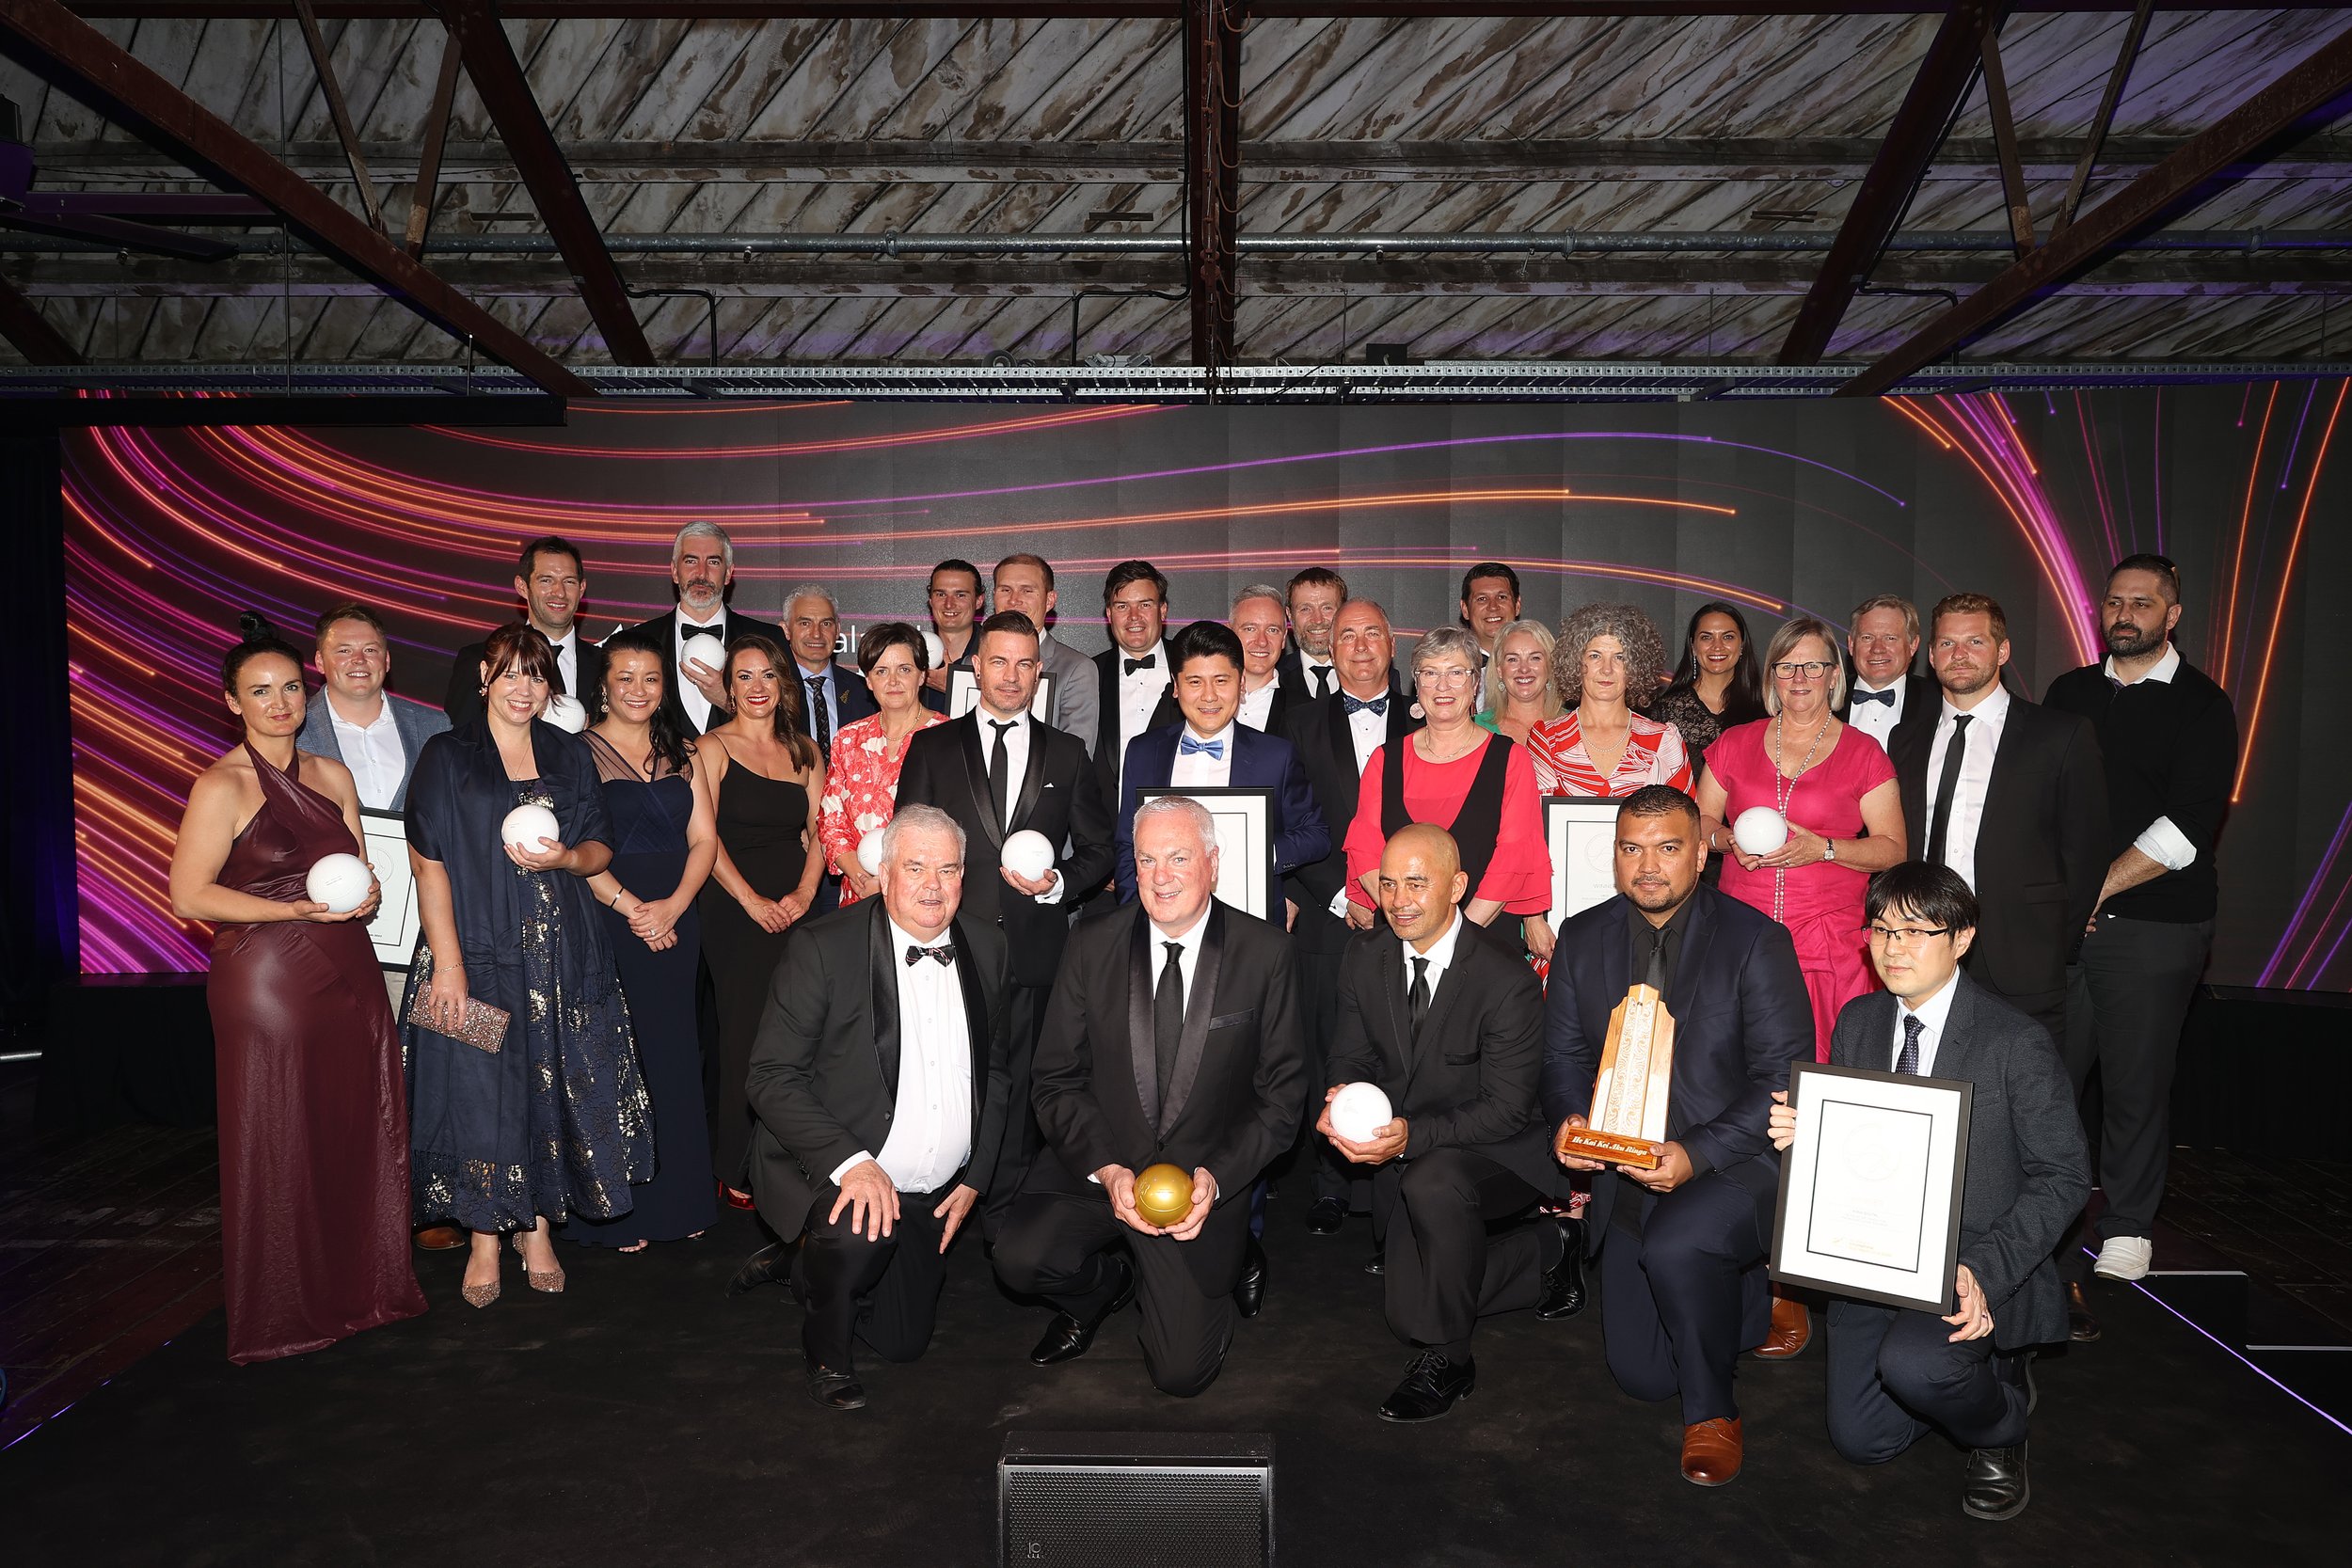  AUCKLAND, NEW ZEALAND - OCTOBER 27: Award winners and presenters pose on stage for a group photo following the New Zealand International Business Awards 2022 at Shed 10 on October 27, 2022 in Auckland, New Zealand. (Photo by Phil Walter/Getty Images